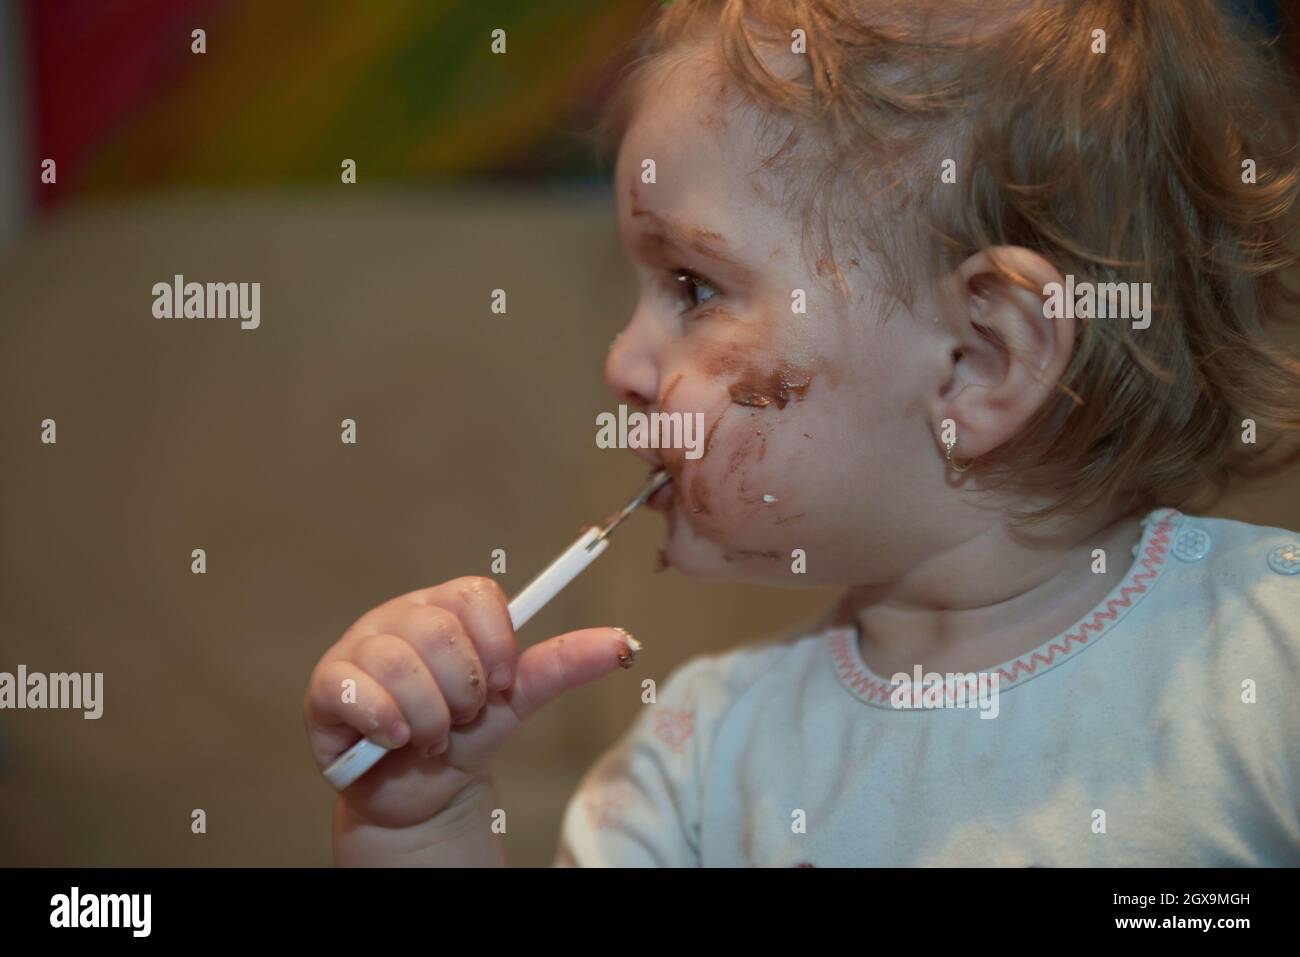 Cute little baby girl eating her chocolate desert after dinner with a spoon and making a mess dirty face Stock Photo